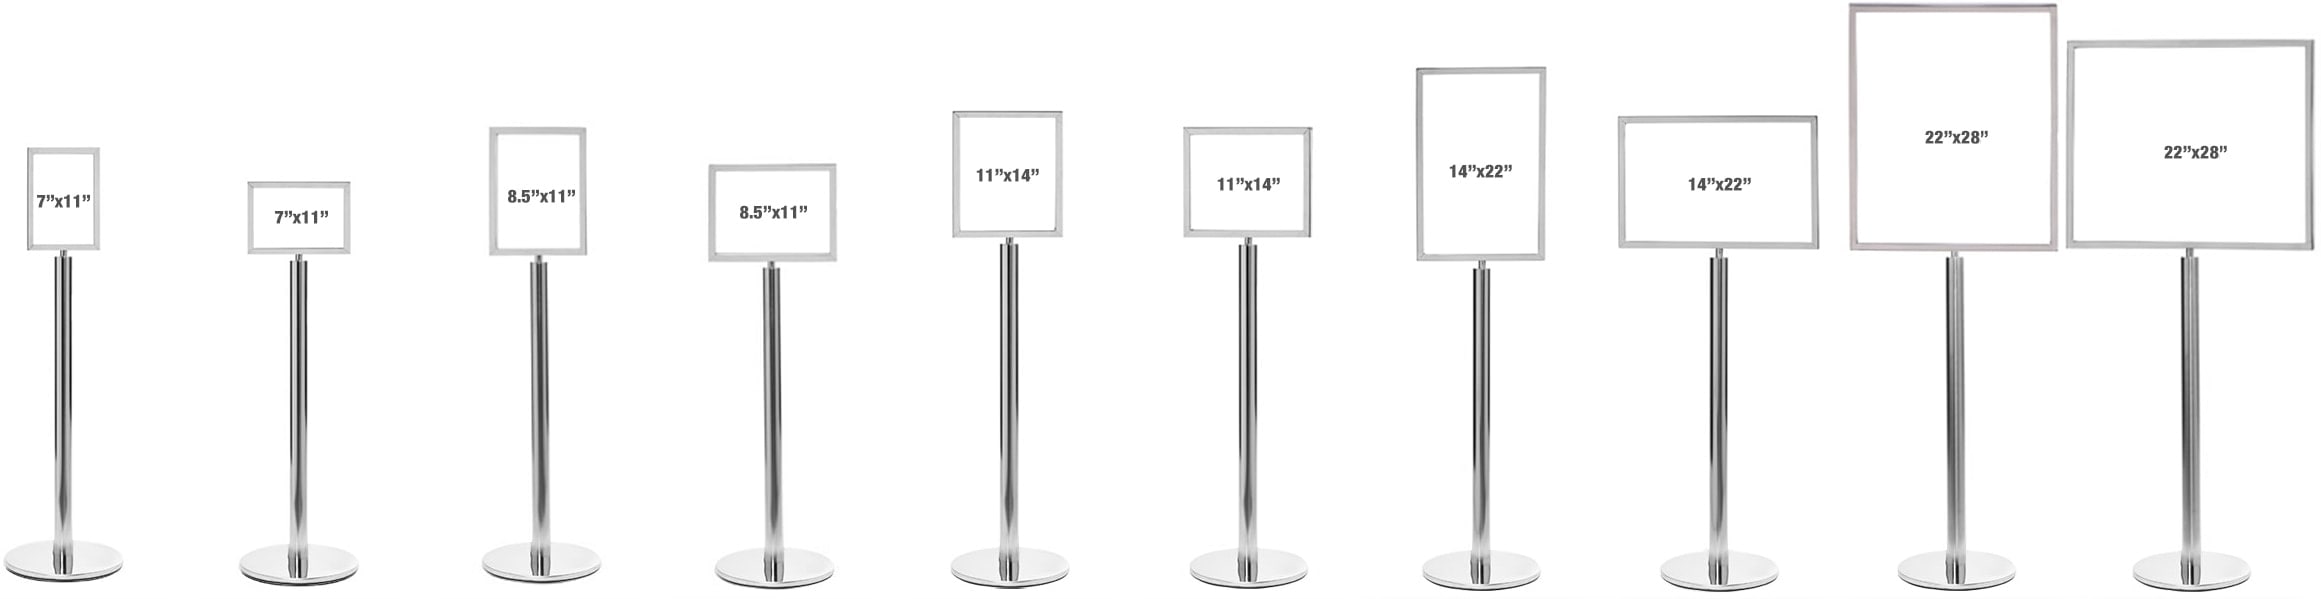 Sing Stands and Size options